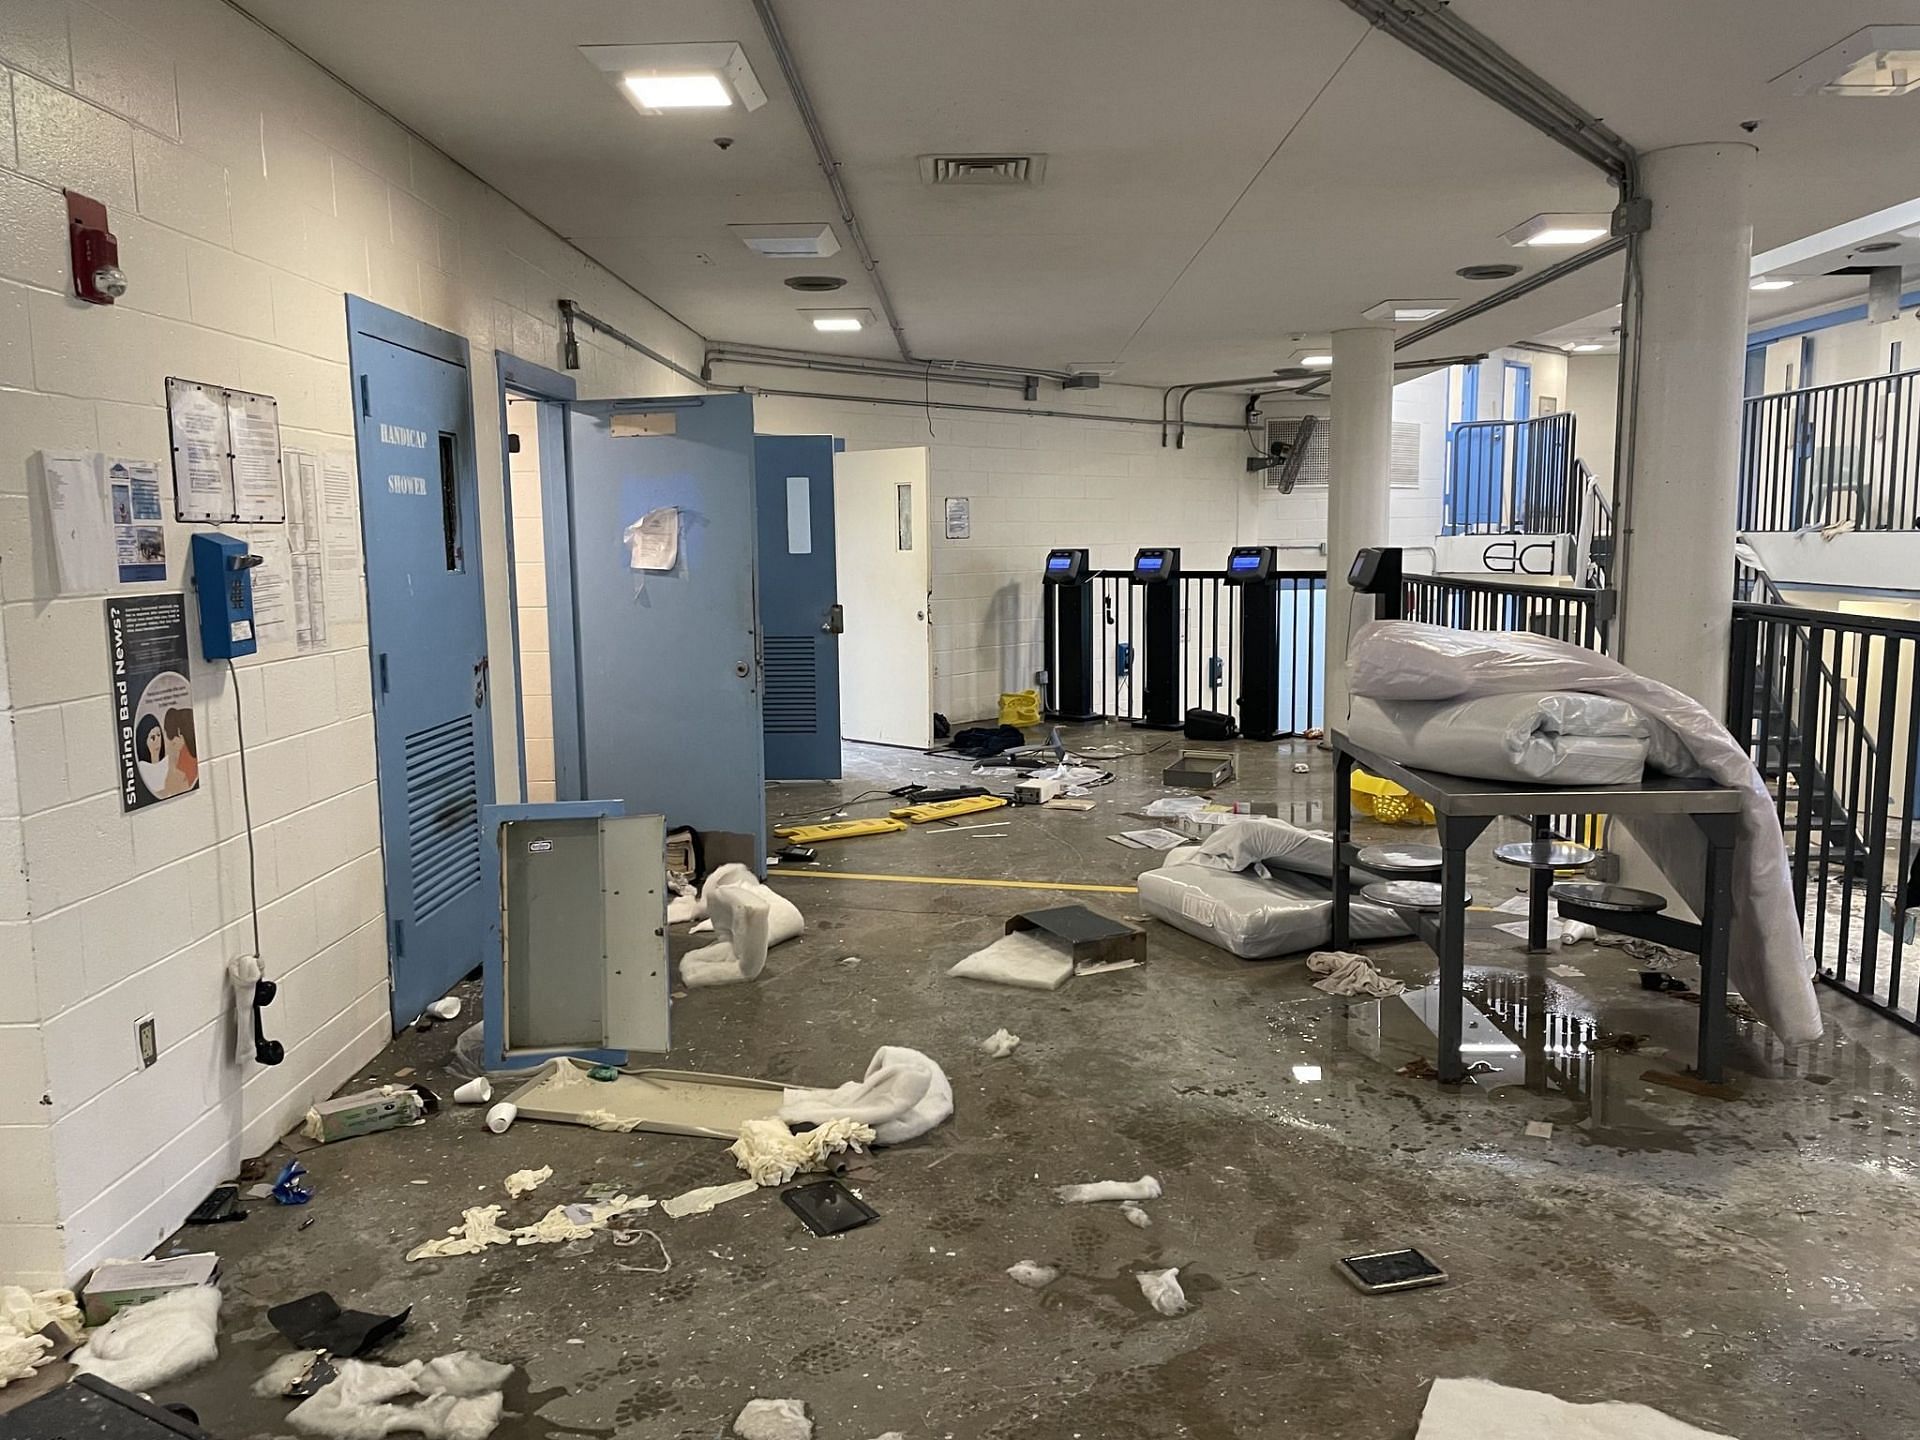 Images released by jail authorities showed shocking images of the damage done by inmates during the standoff. (Image via Bristol County Jail)